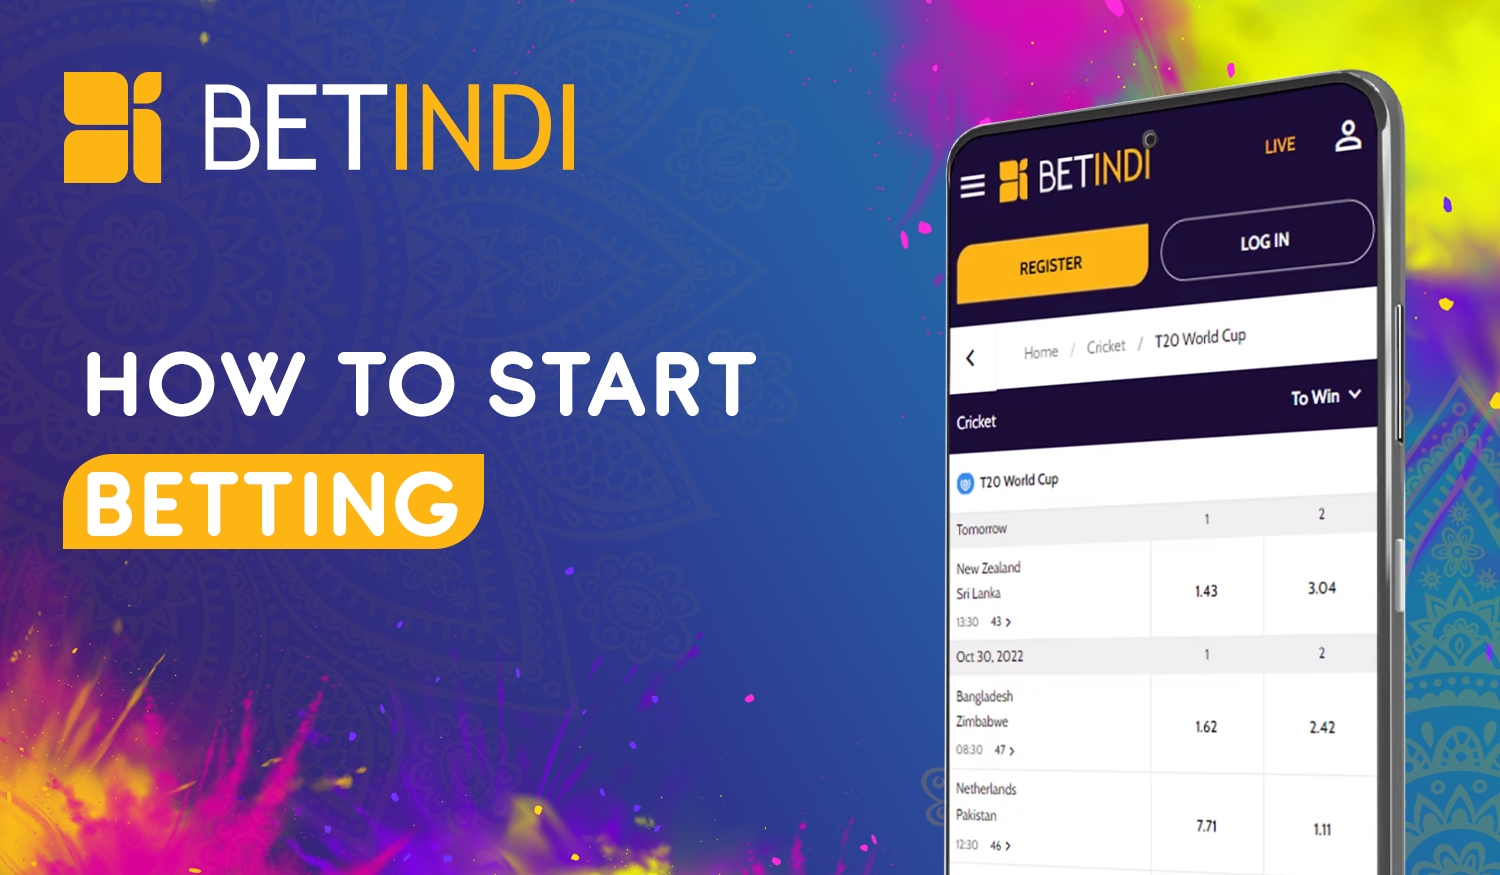 Step by step instruction on how to start betting on the Betindi site 